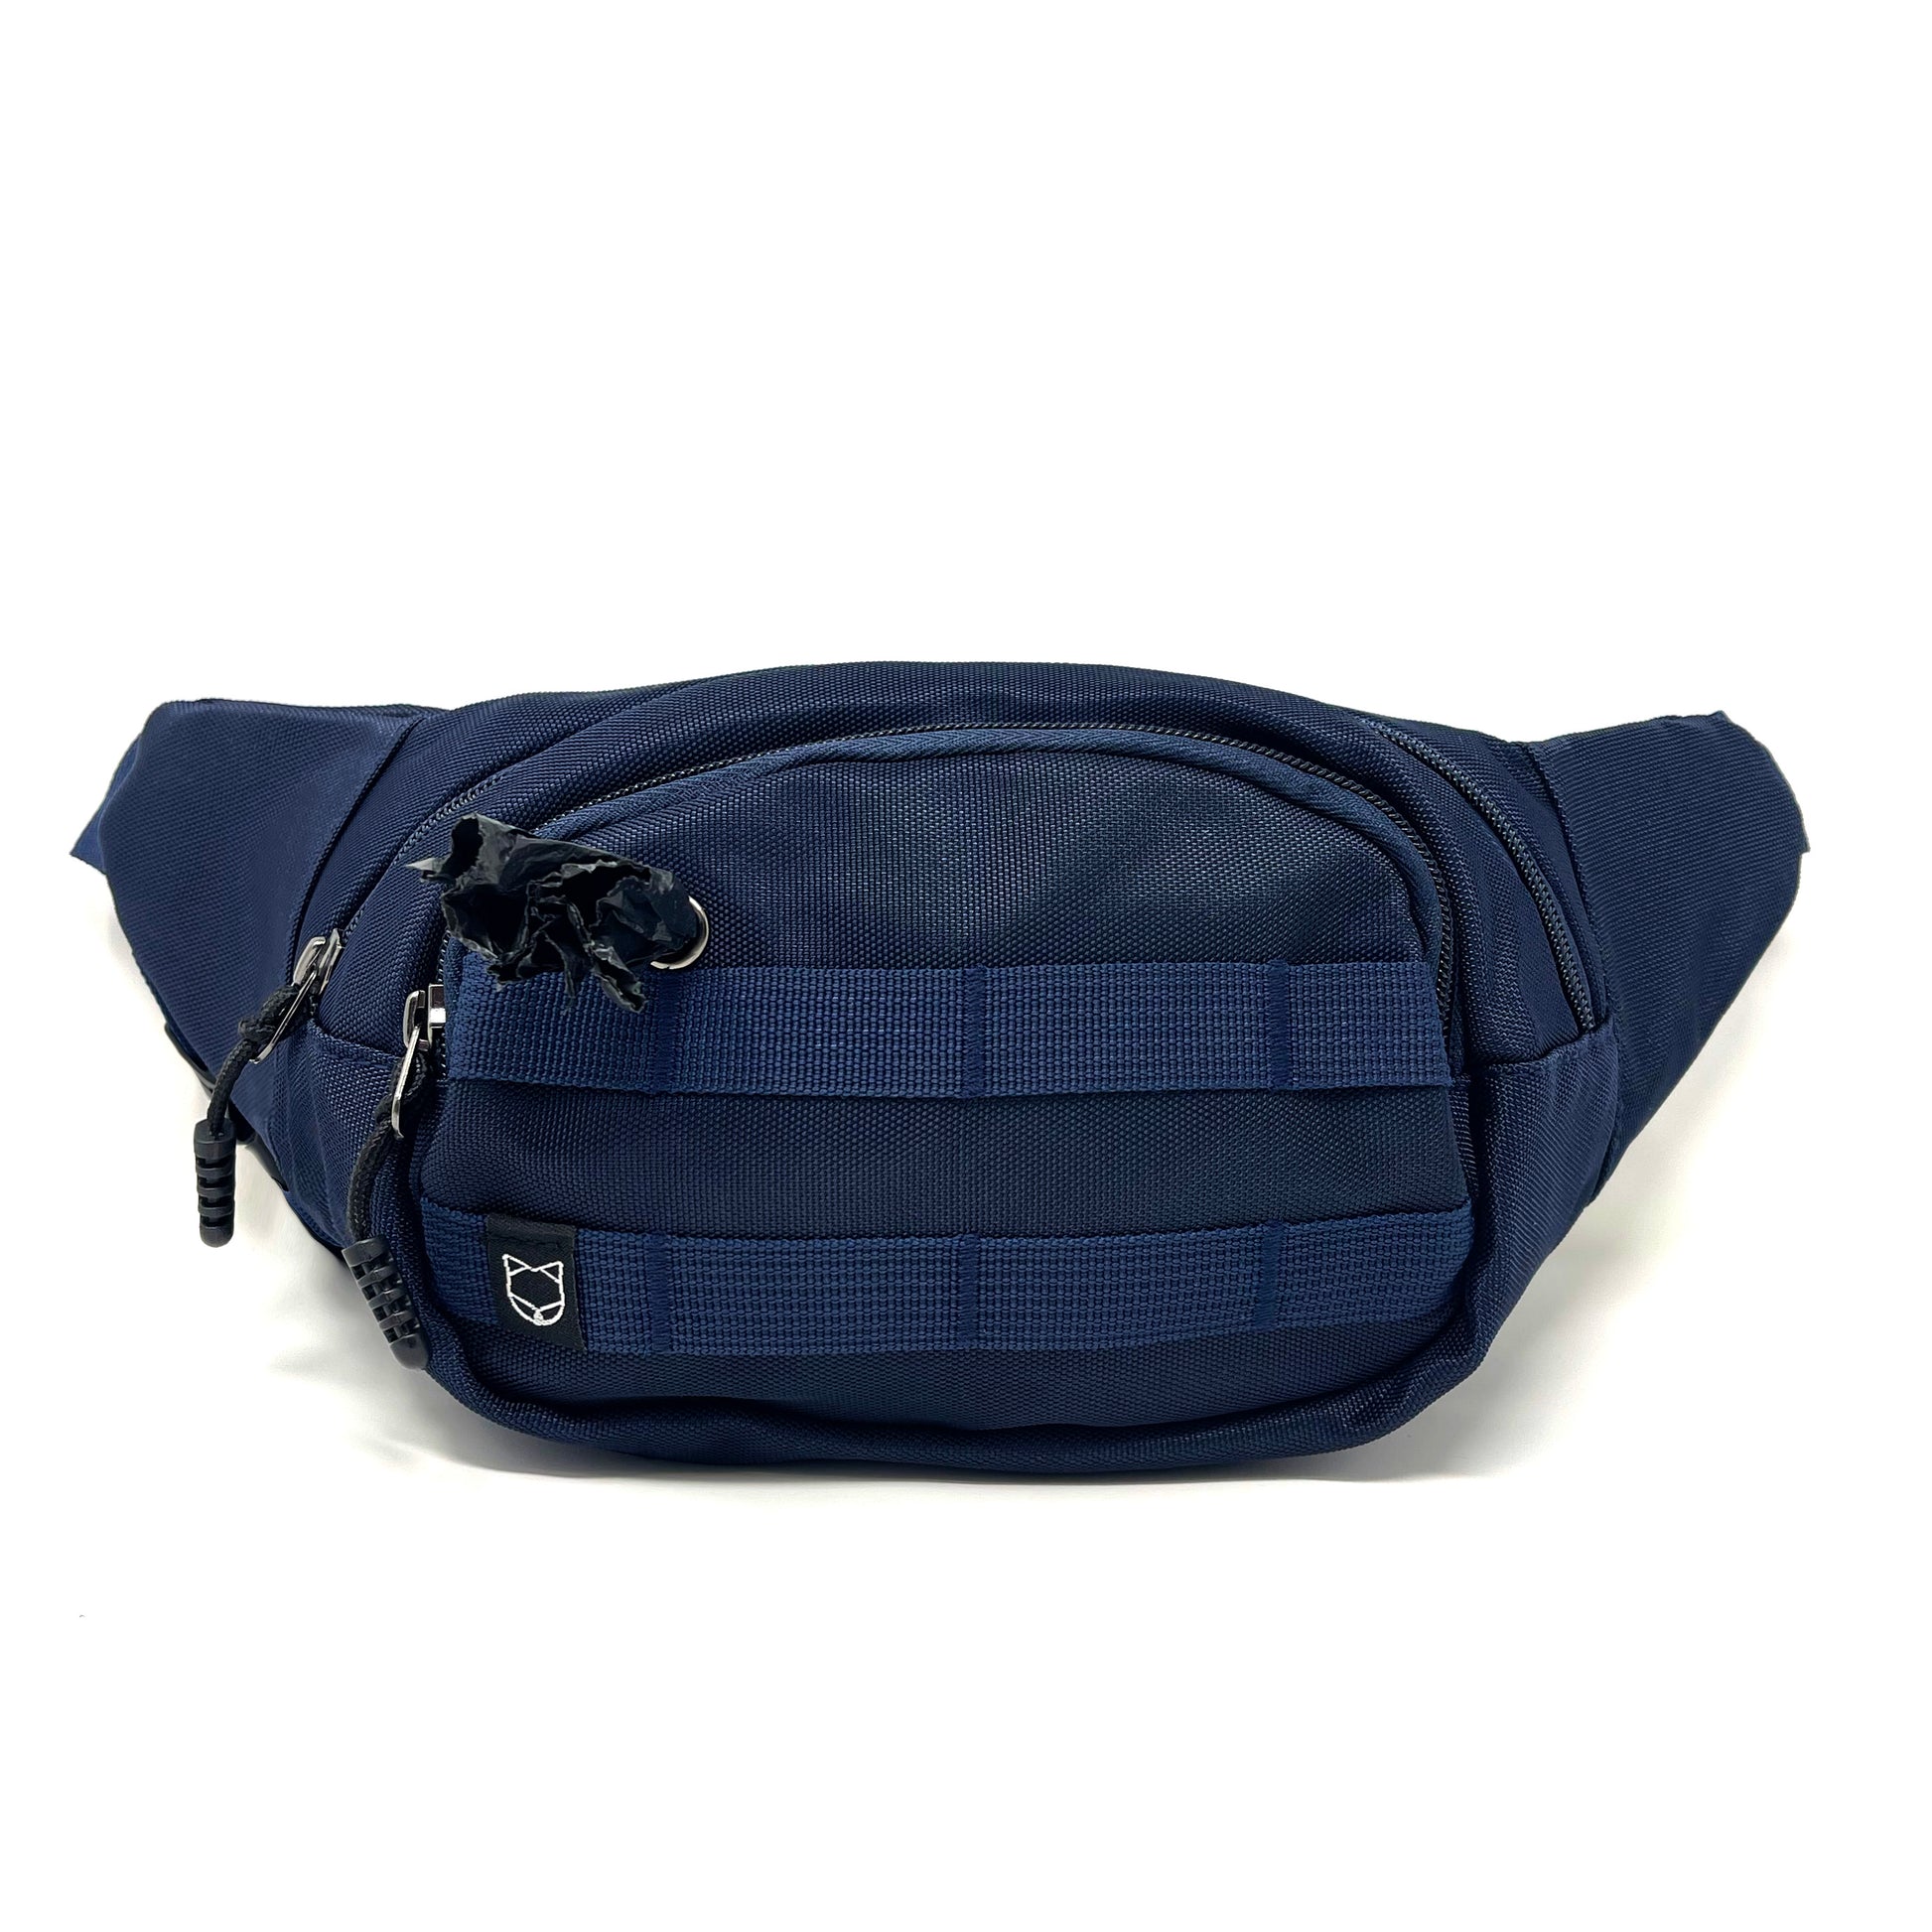 Fanny Pack for dog walking and training. There are multiple compartments and straps in the front where you can clip stuff onto. There is a poop bag dispenser in the front for easy access. The strap is adjustable.